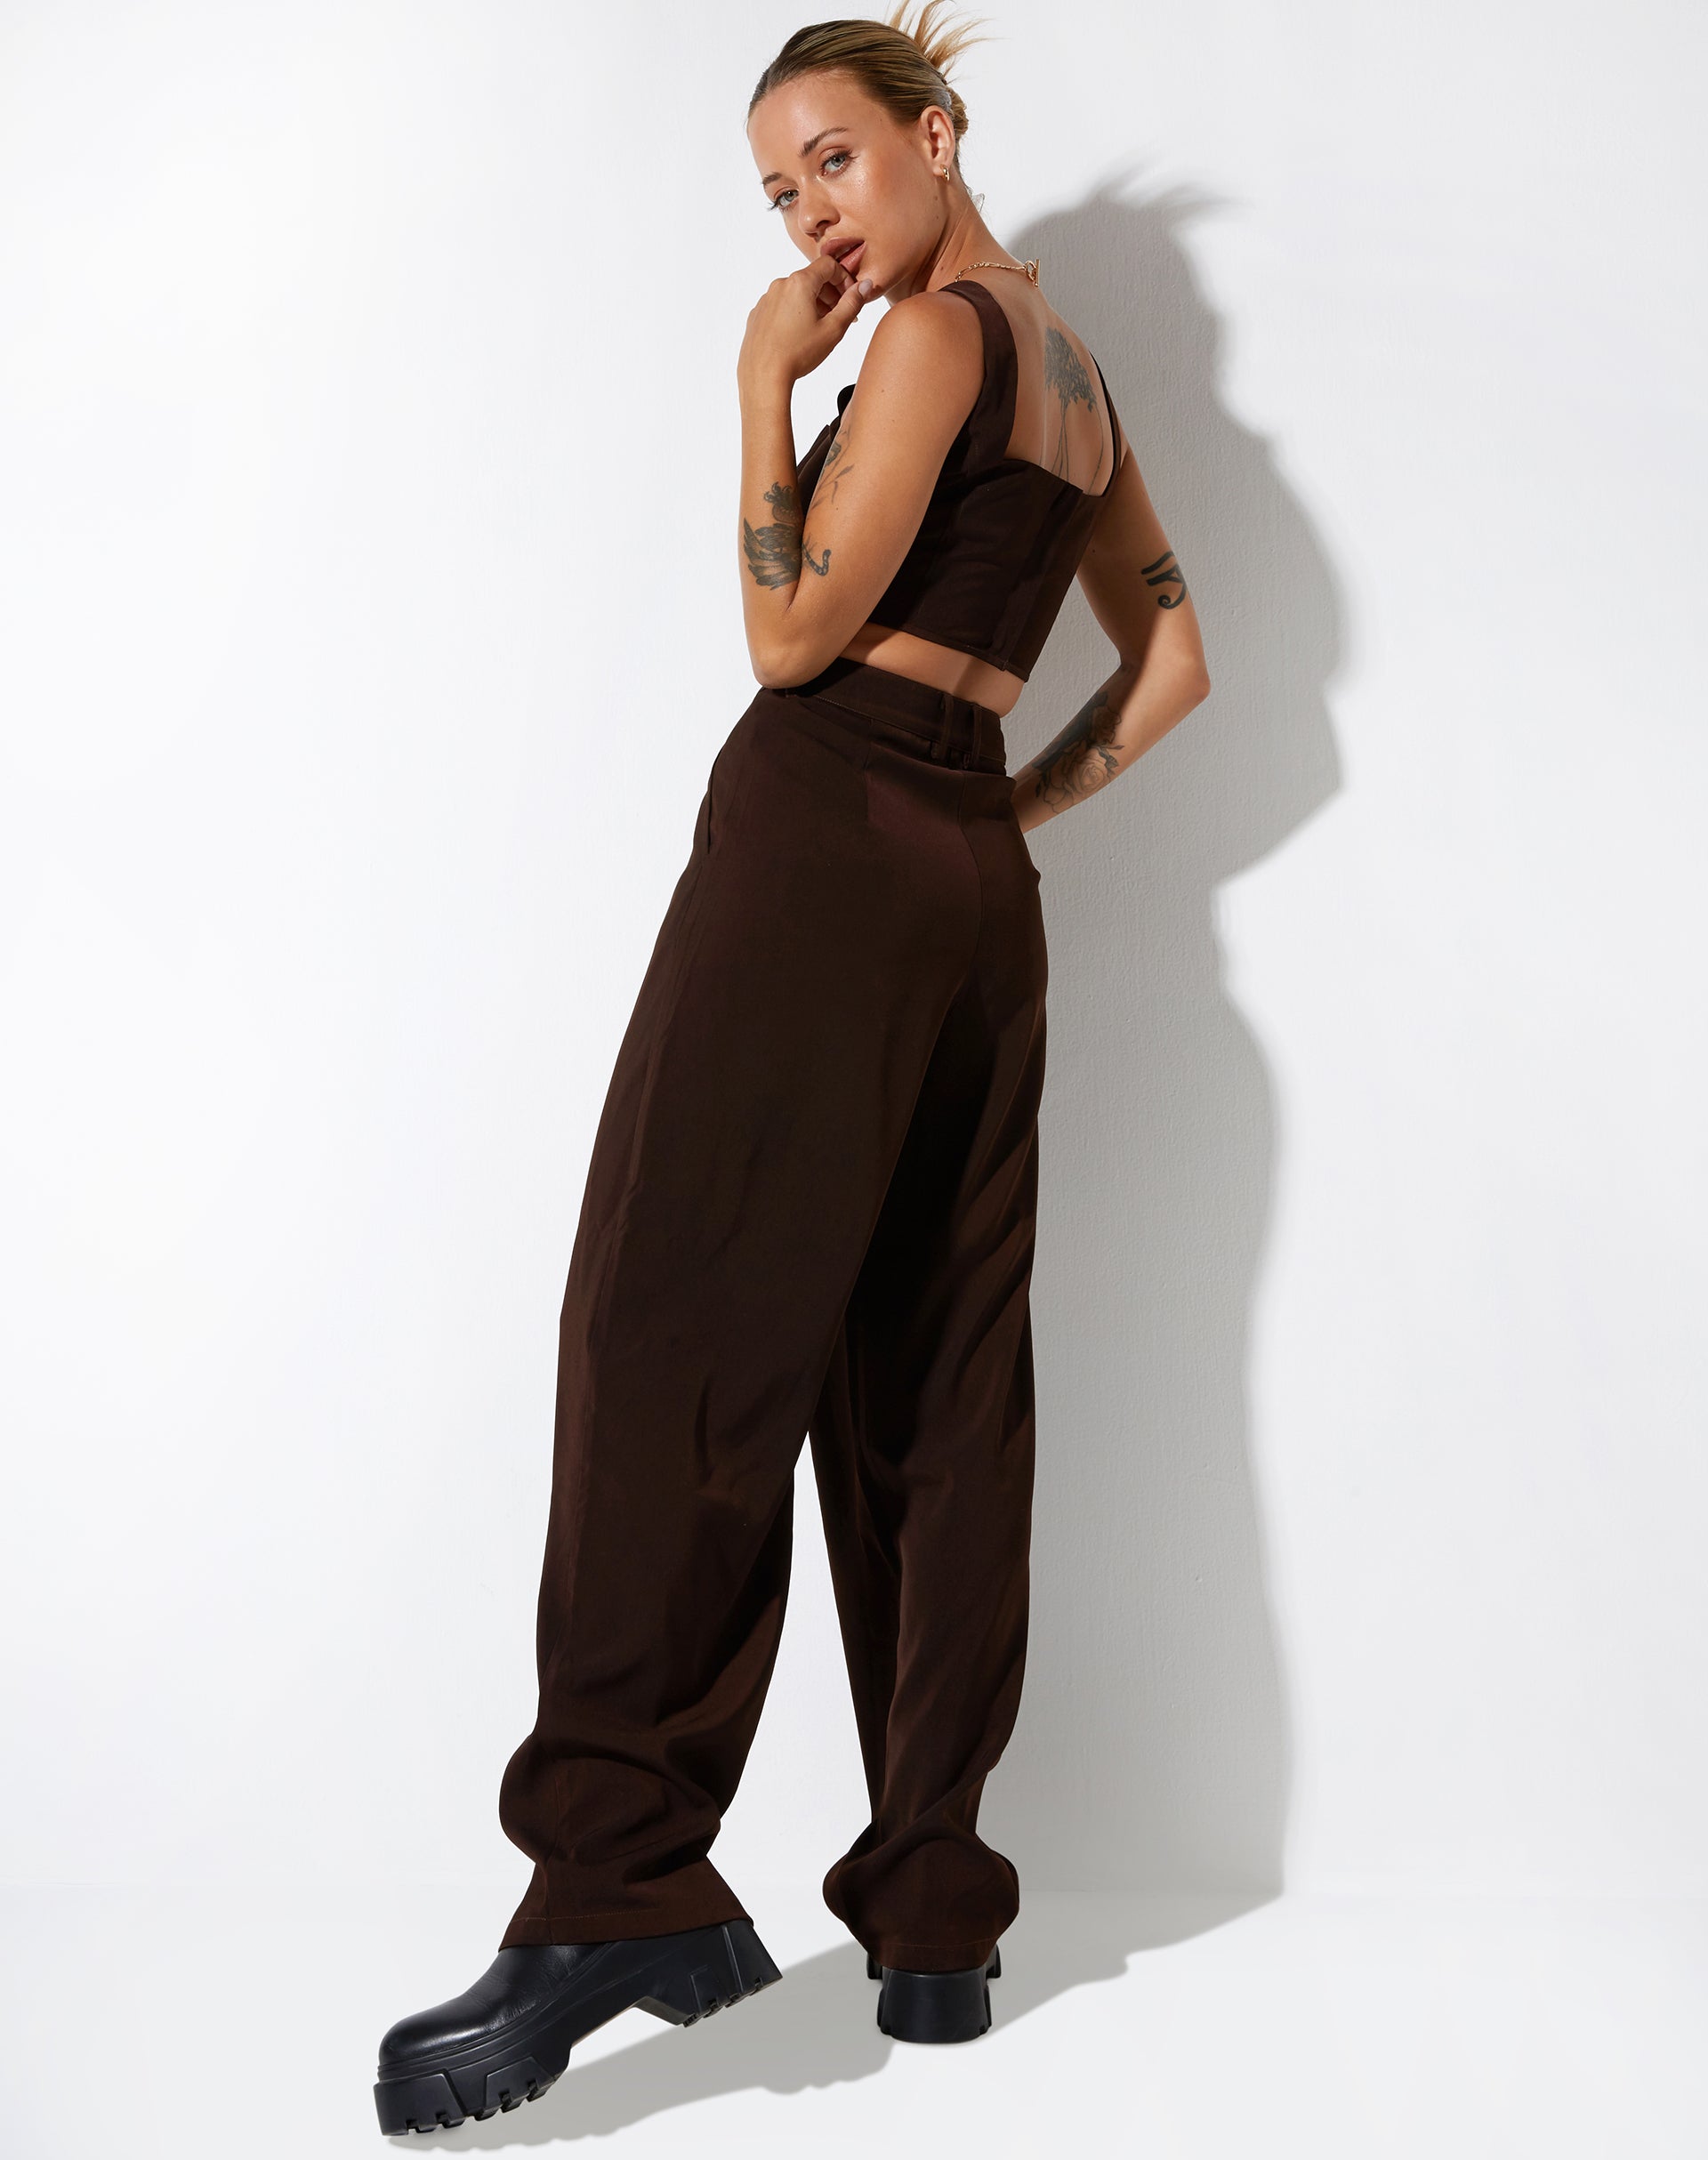 IMAGE OF Cimo Trouser in Tailoring Dark Chocolate